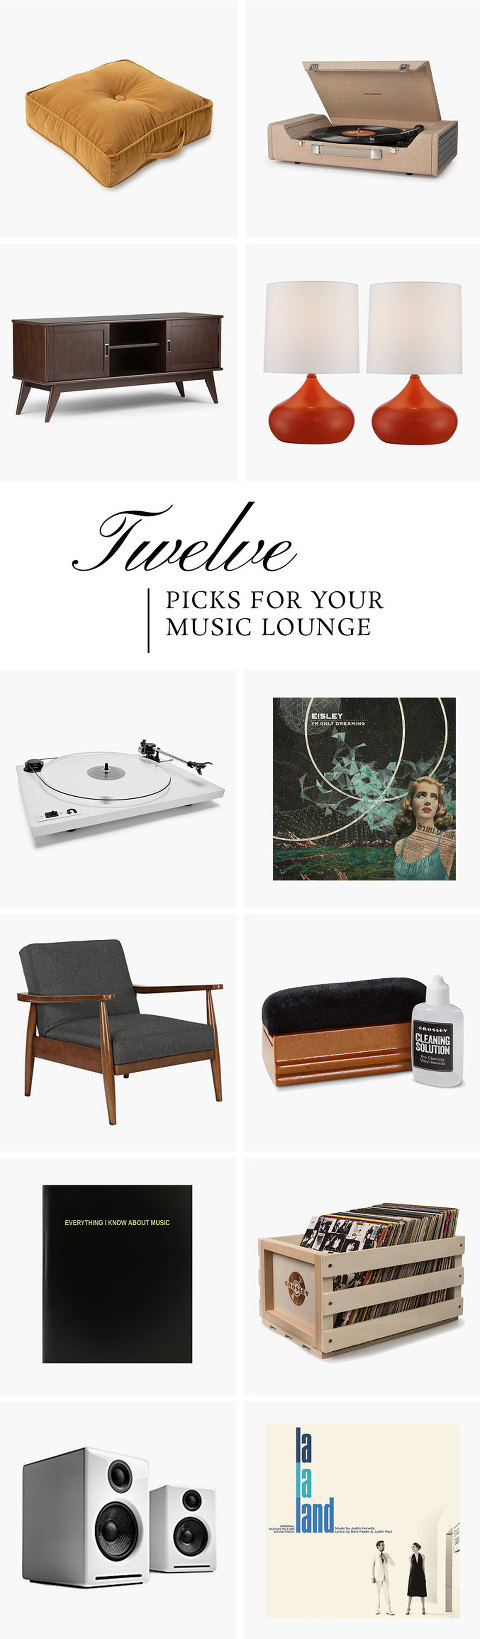 Everything You Need For Your Retro-Inspired Music Lounge | dreamgreendiy.com